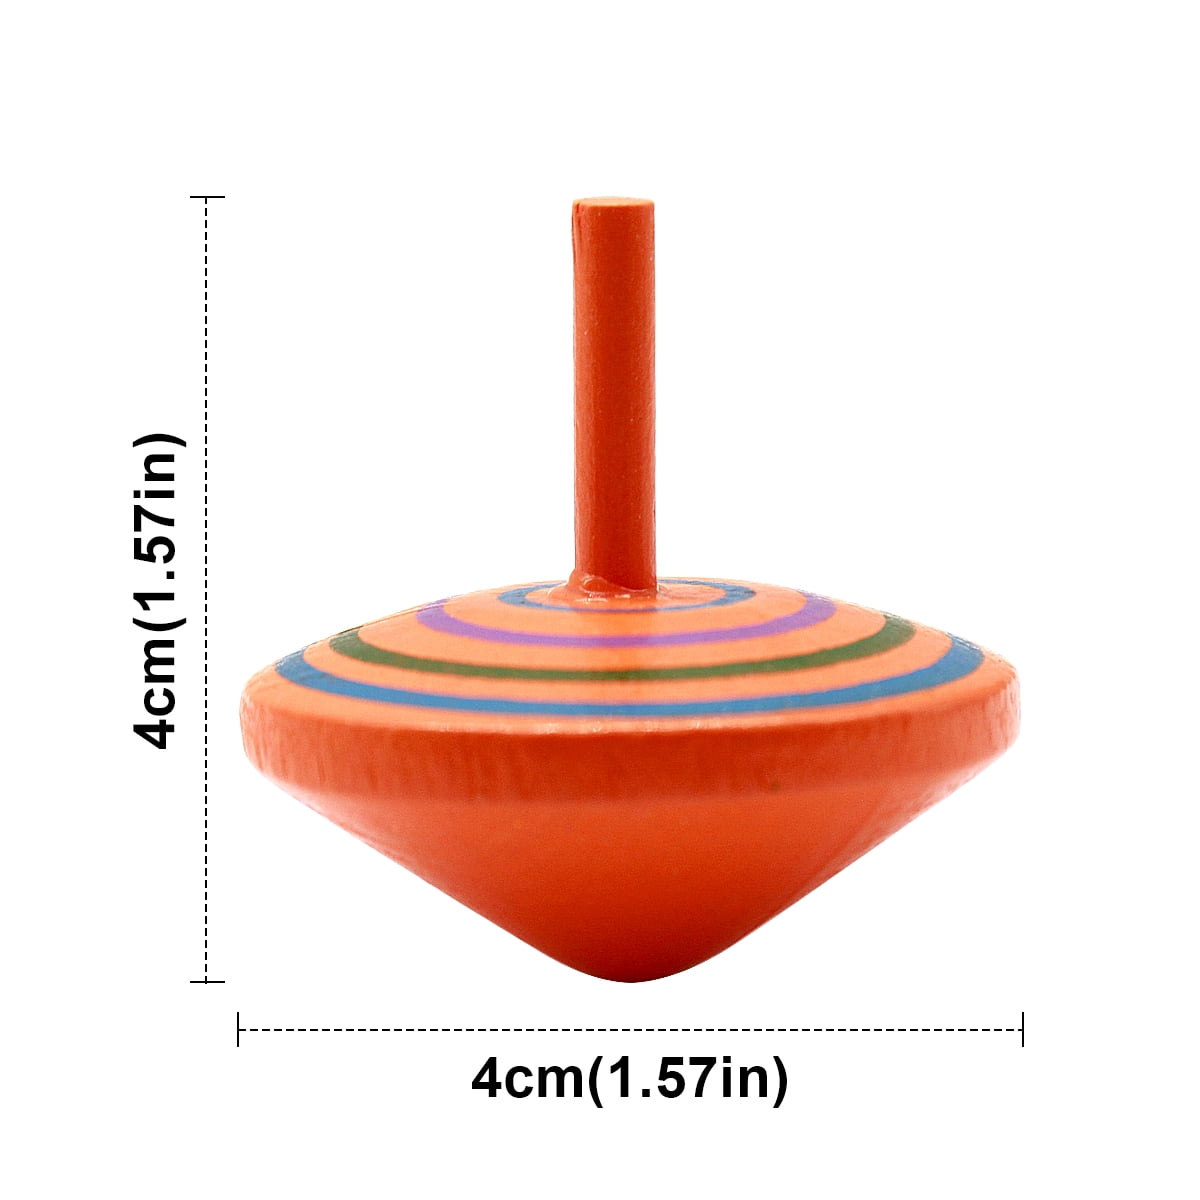 Details about   18 Pcs Colorful Wooden Spinning Top Safe Non-toxic Wood Toy For Kids Children 